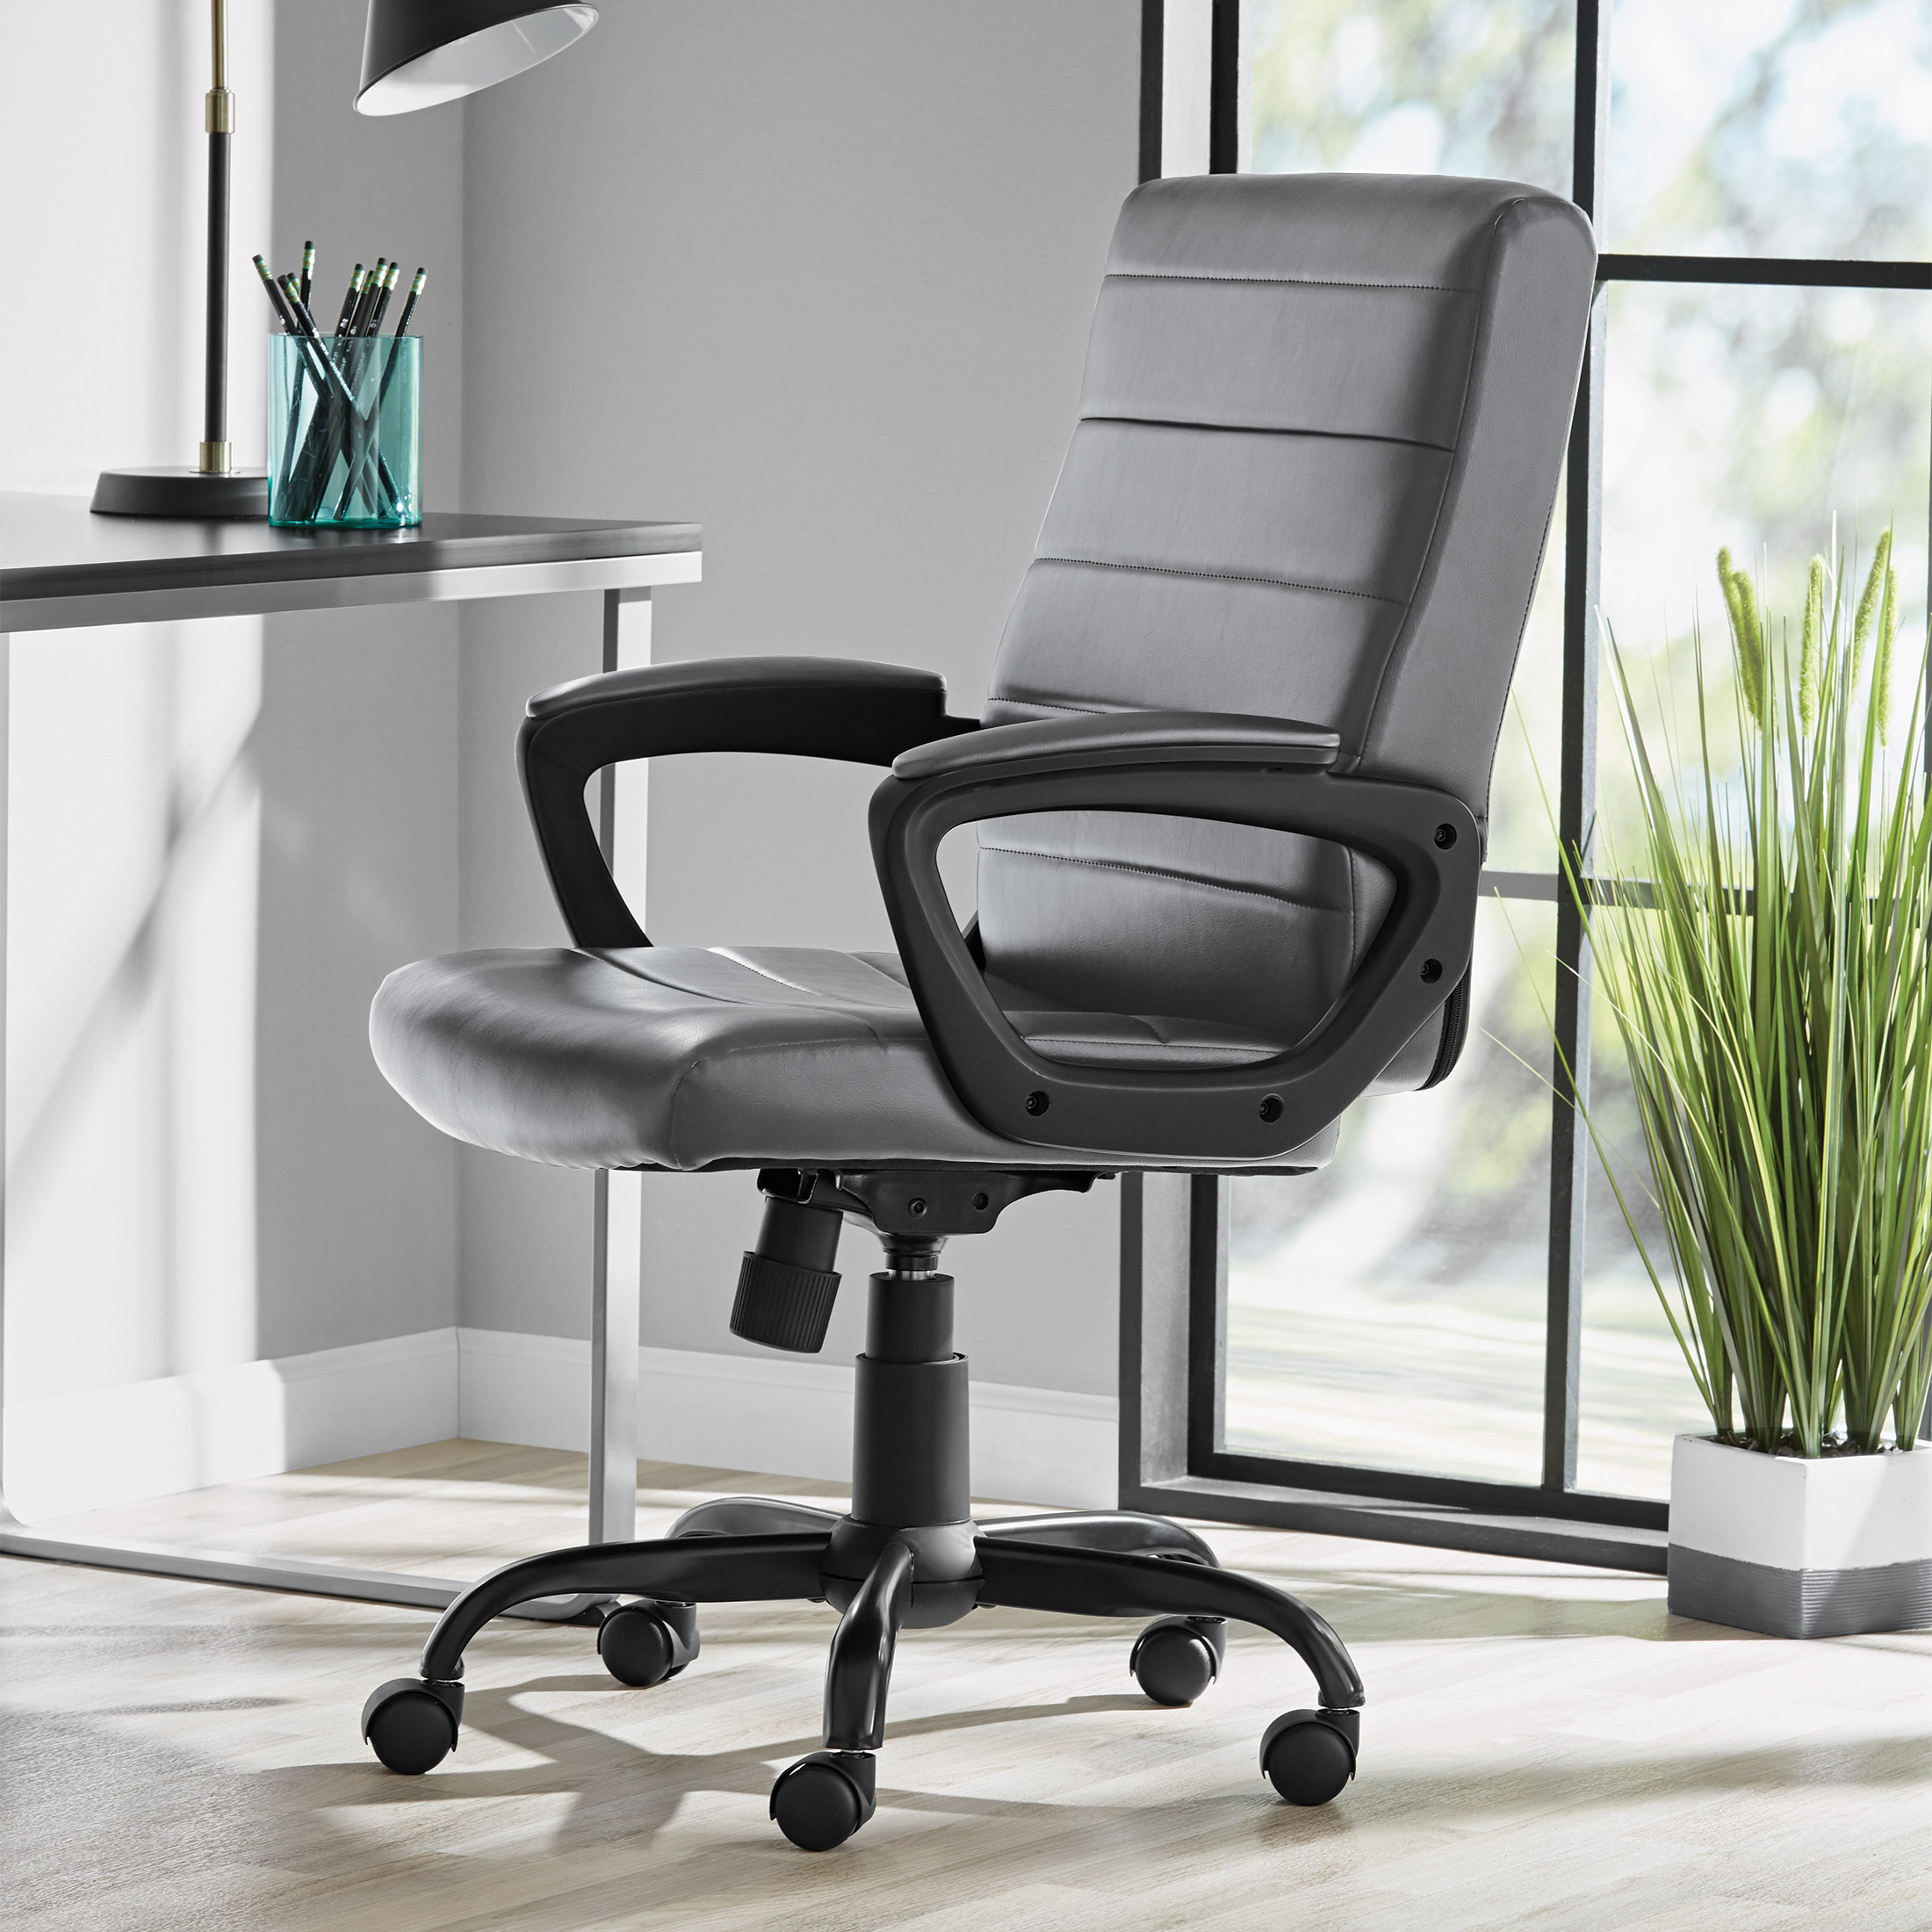 Mainstays Bonded Leather Mid-Back Manager's Office Chair, Gray - image 3 of 11